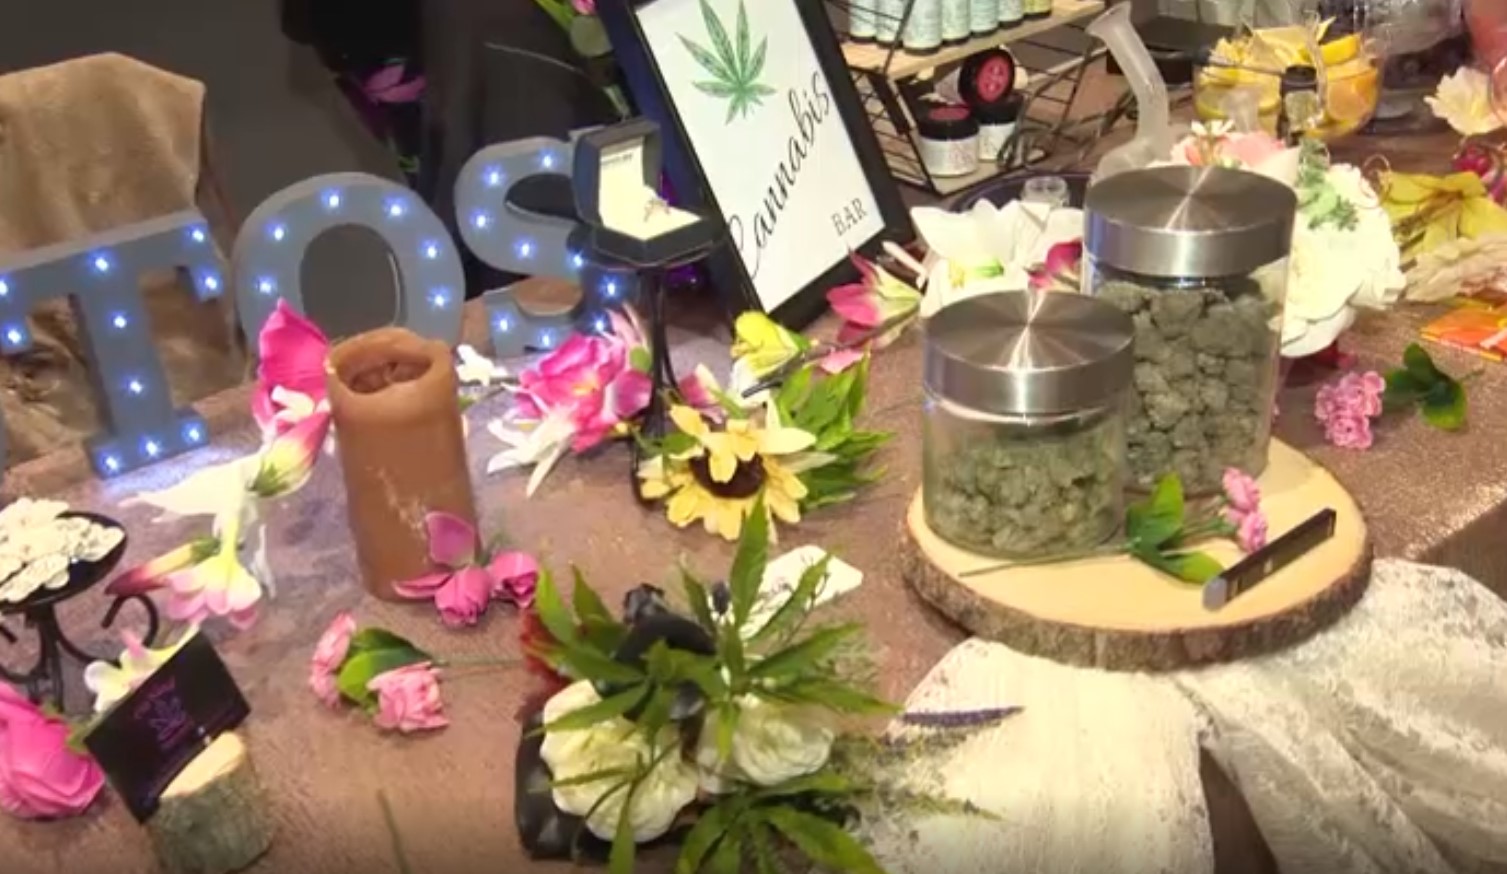 ‘Budtenders’ Are Becoming A Trend At Wedding Receptions